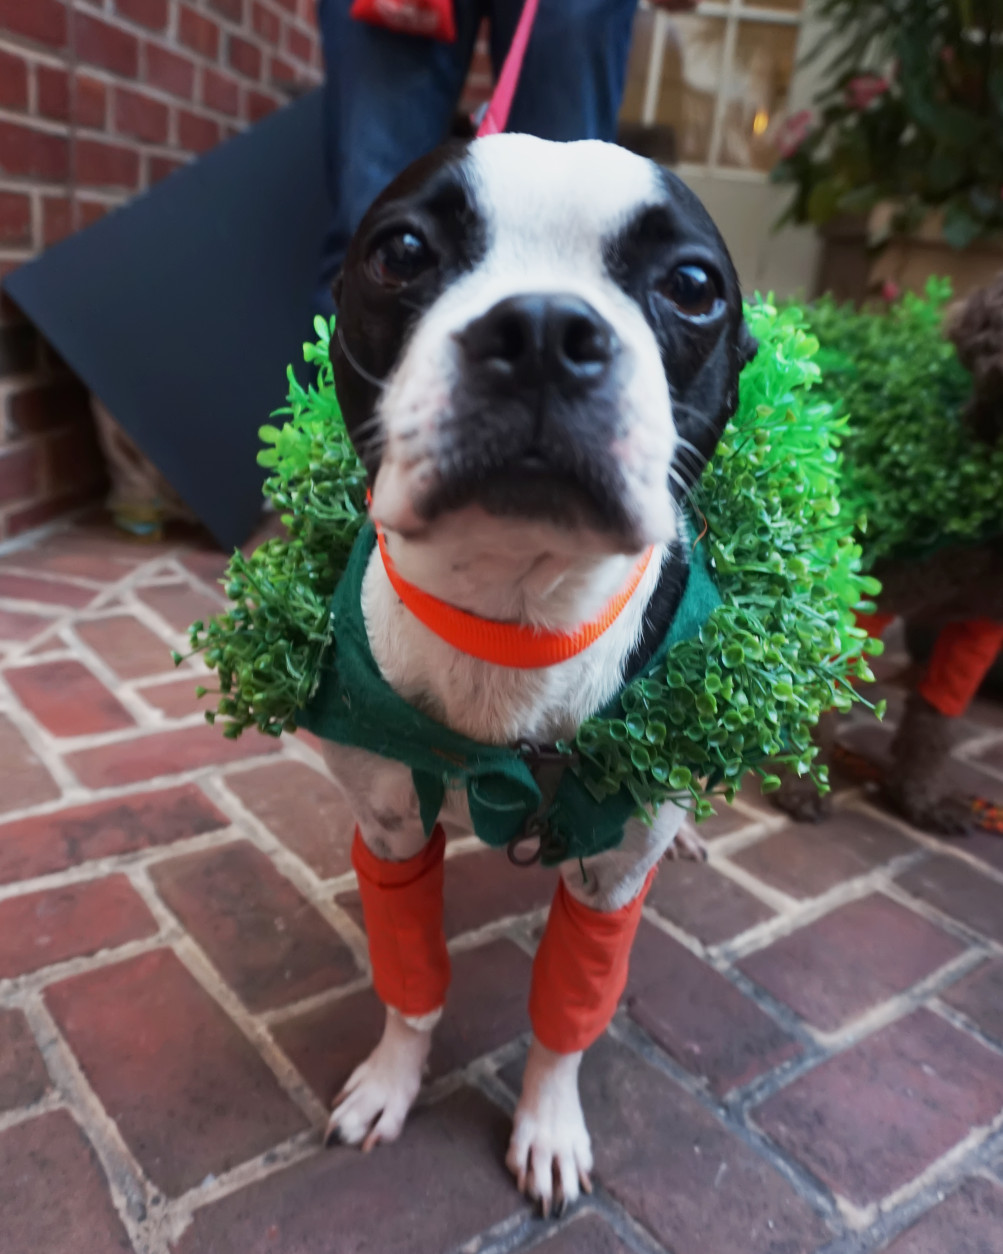 Klonney the Boston Terrier takes a break from her Chia Pet trio to mug for the camera. (Shannon Finney Photography)